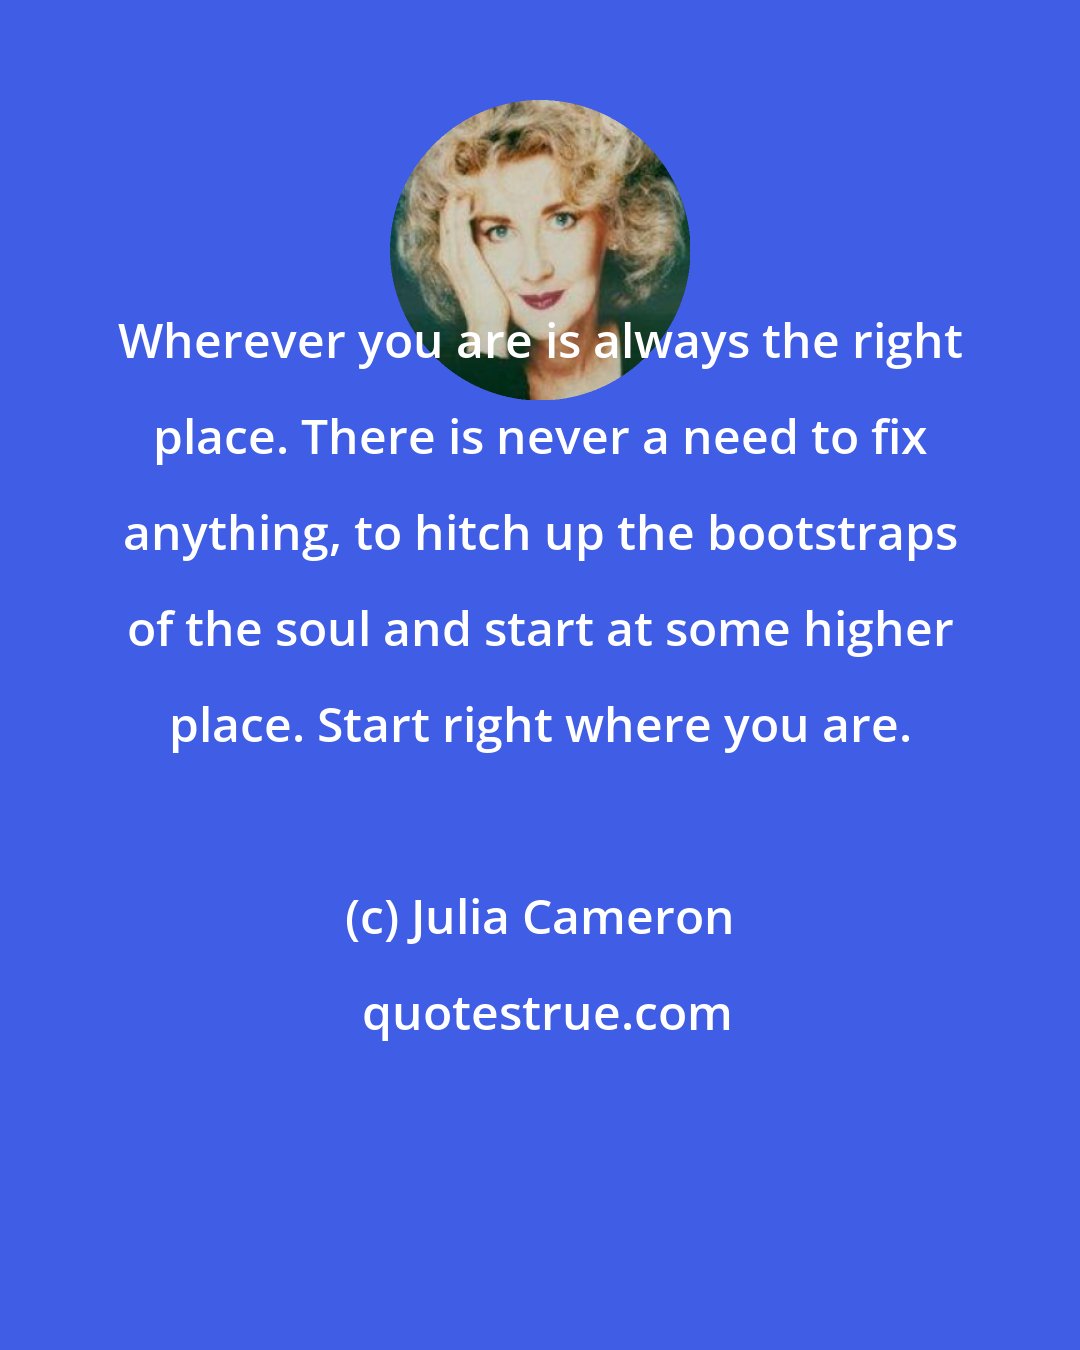 Julia Cameron: Wherever you are is always the right place. There is never a need to fix anything, to hitch up the bootstraps of the soul and start at some higher place. Start right where you are.